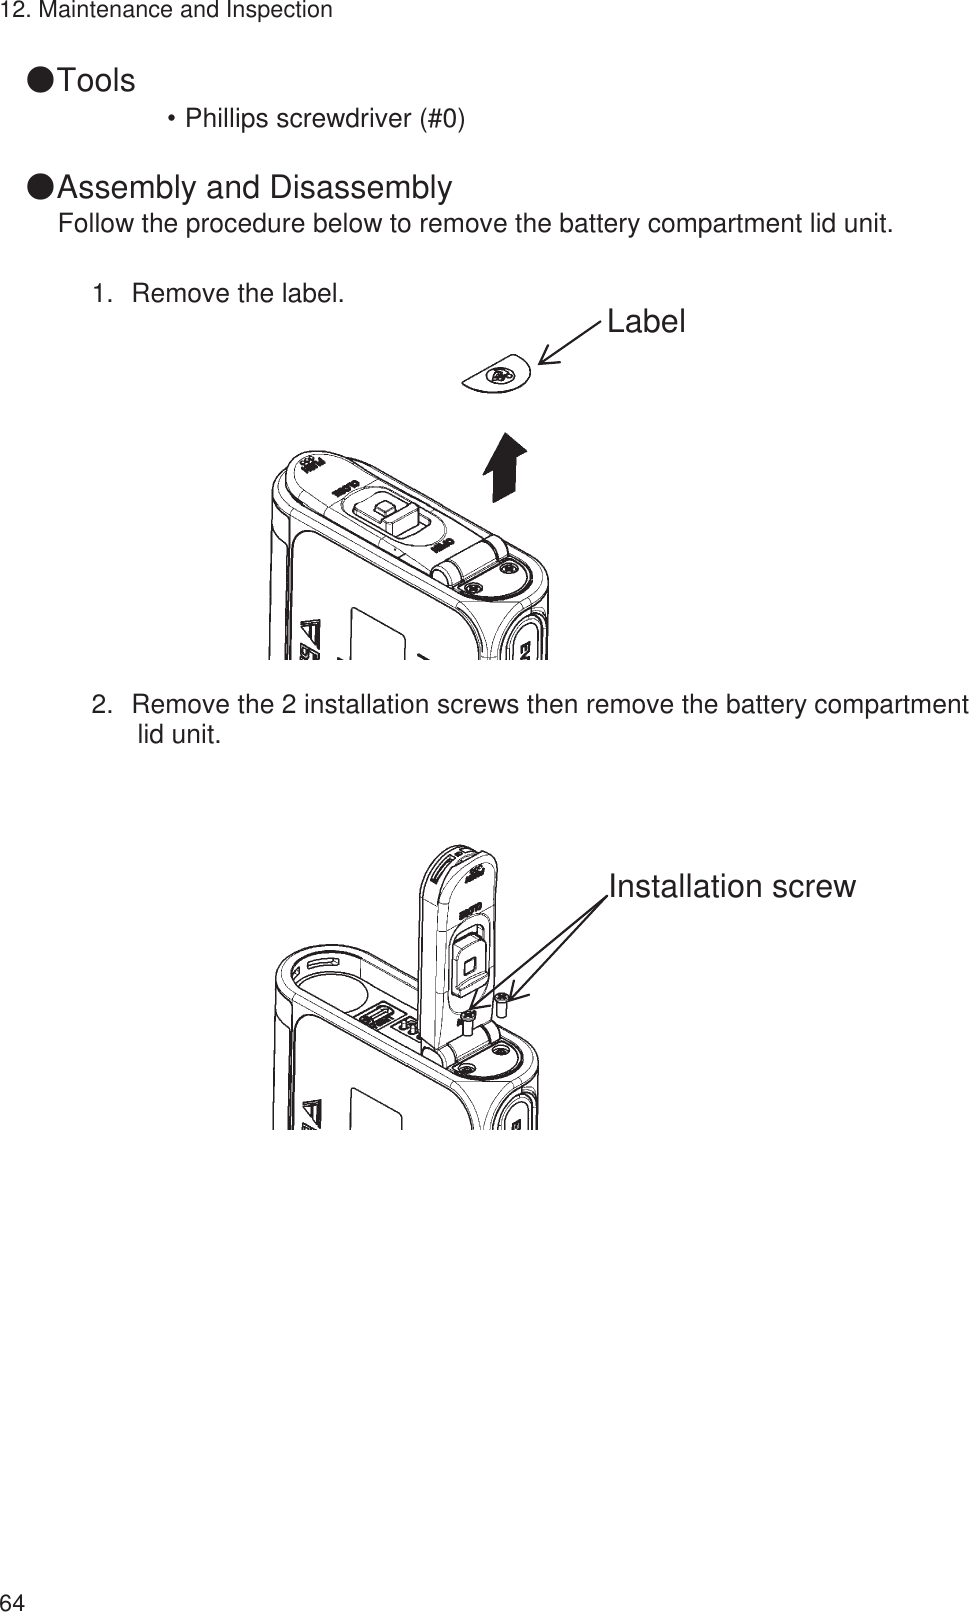 12. Maintenance and Inspection 64 䖃Tools ȷPhillips screwdriver (#0)  䖃Assembly and Disassembly Follow the procedure below to remove the battery compartment lid unit.  1.㻌Remove the label.             2.㻌Remove the 2 installation screws then remove the battery compartment lid unit.                            Label Installation screw 